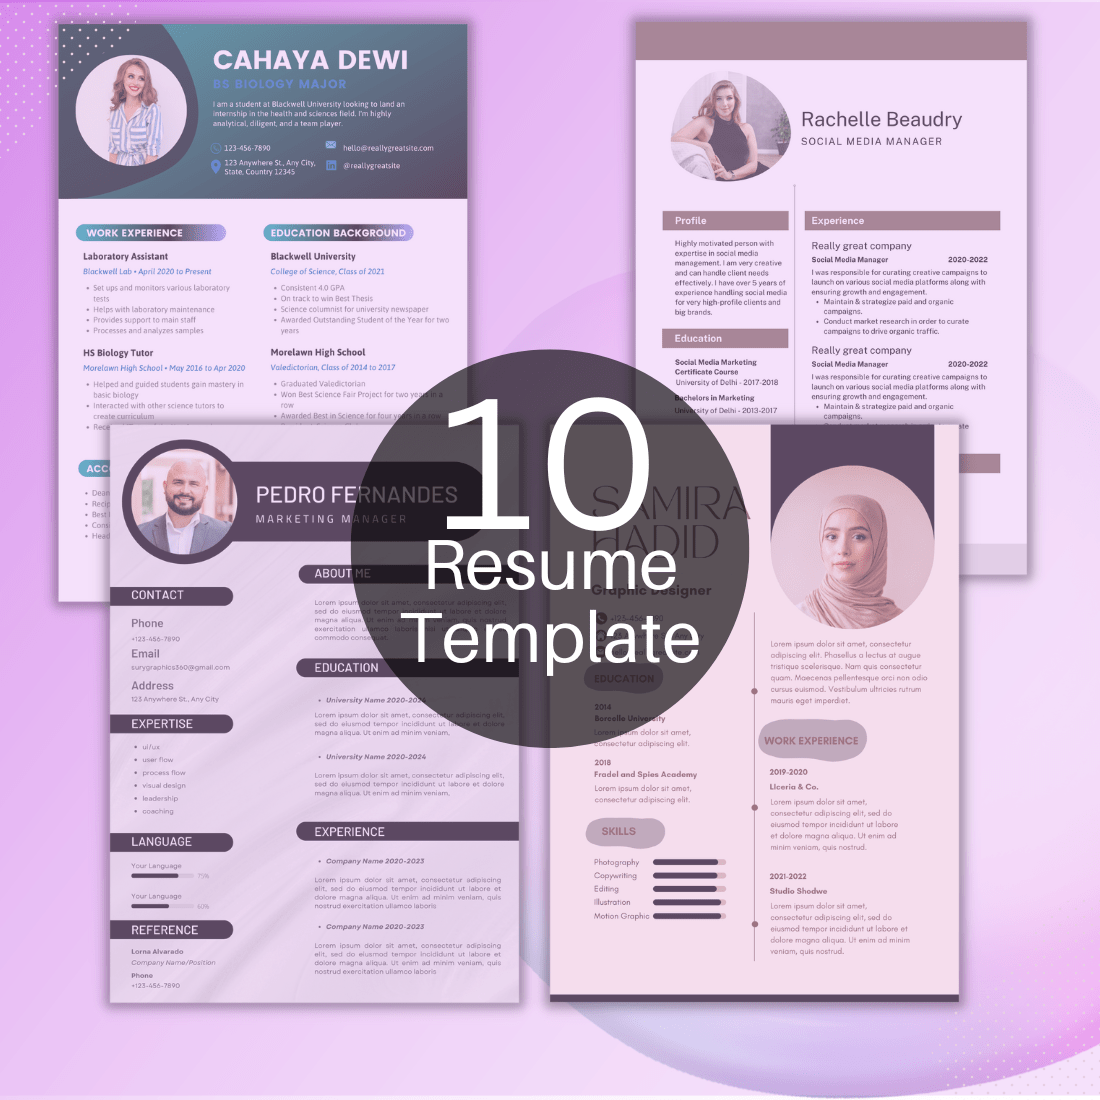 Set of three resume templates with a purple background.